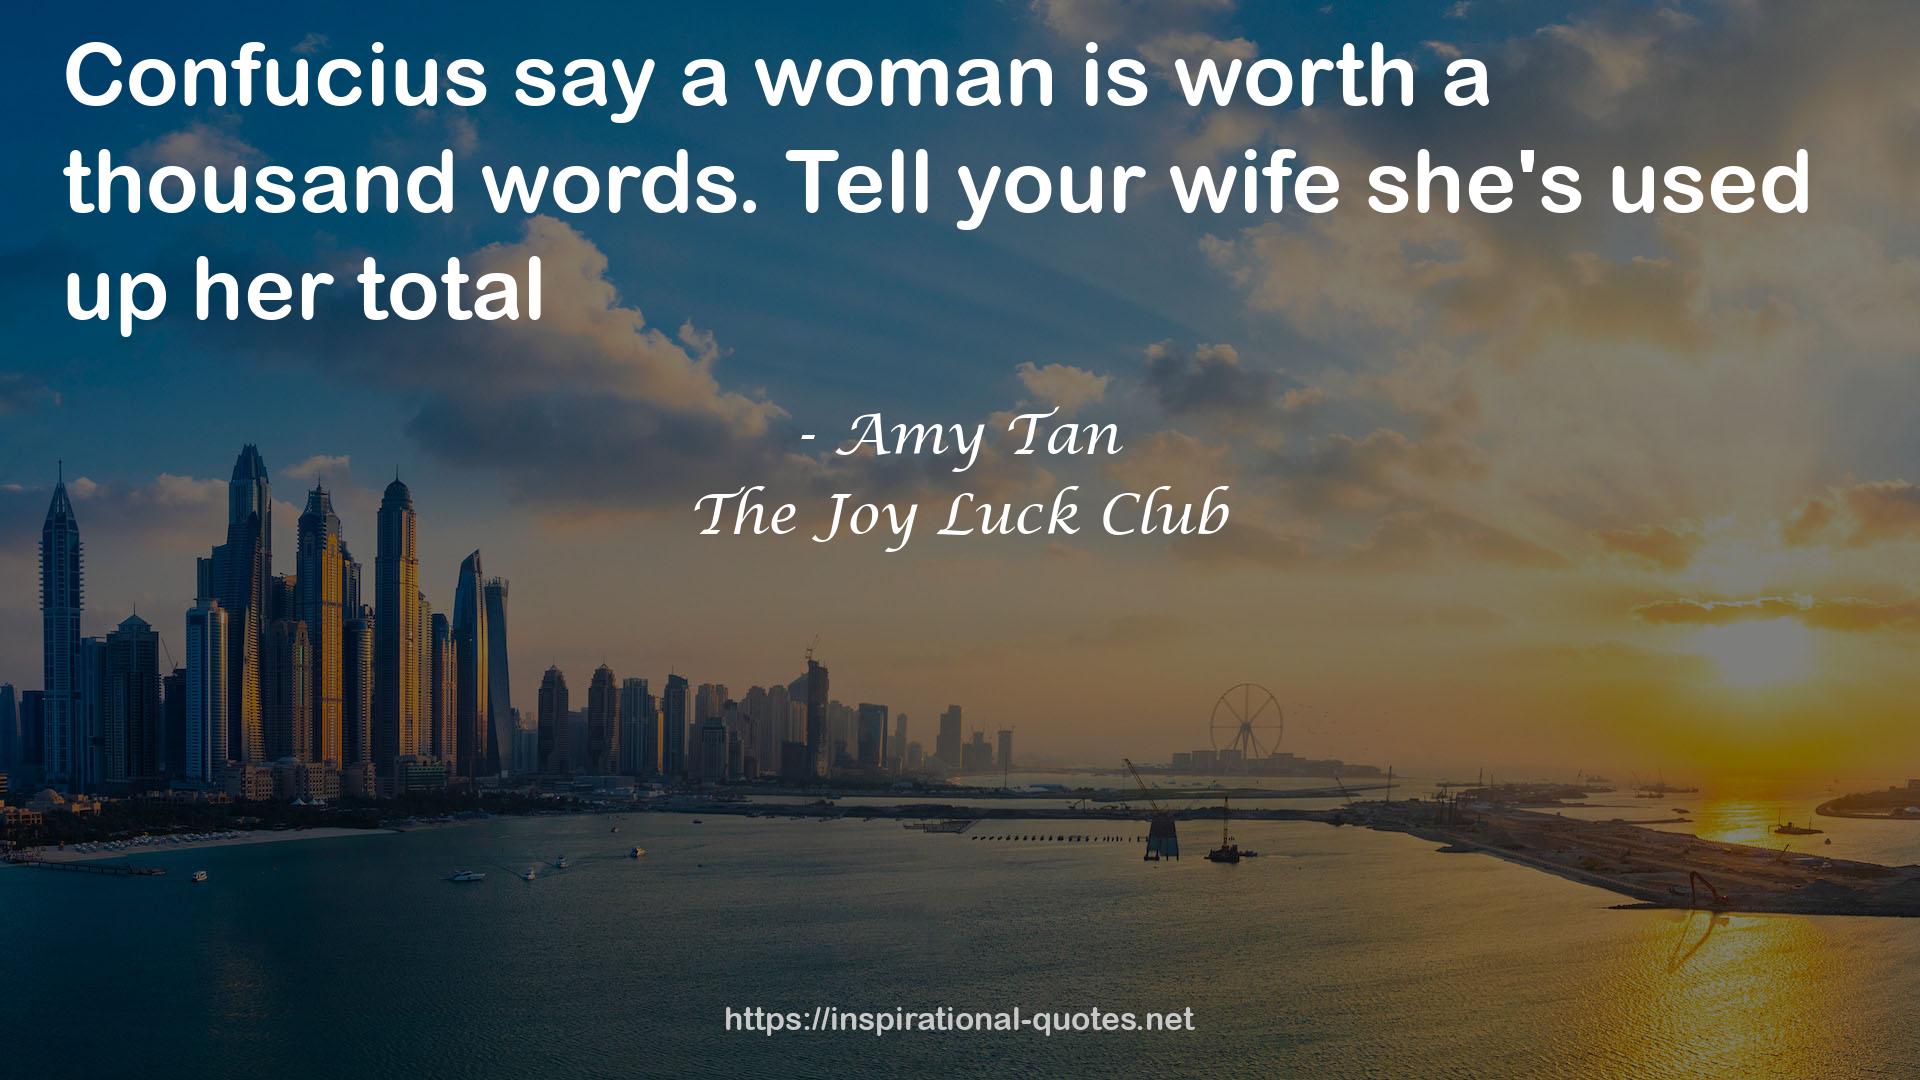 The Joy Luck Club QUOTES